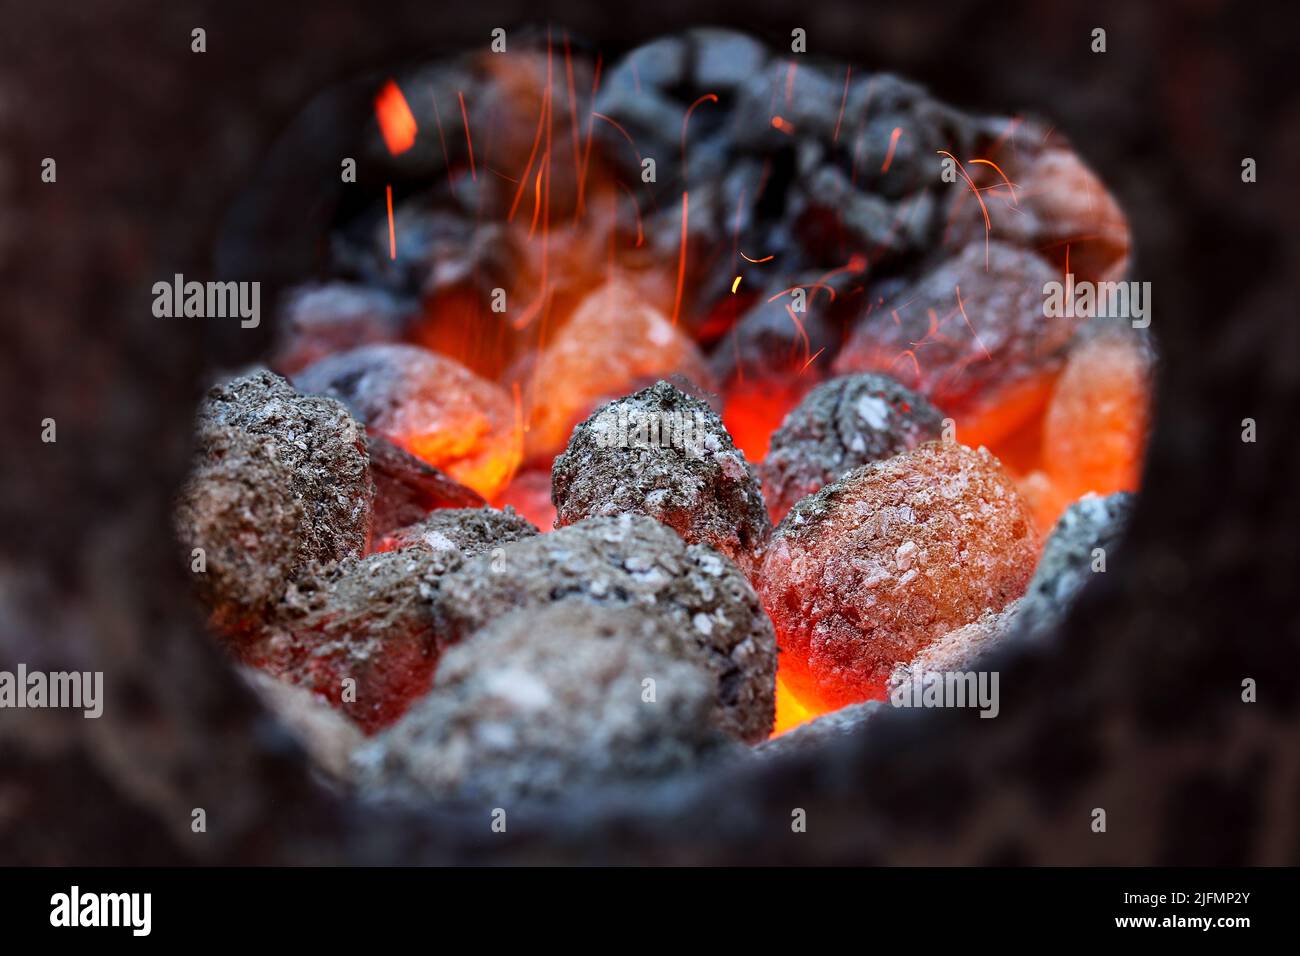 Glimmering heat from glowing charcoal to harden knives Stock Photo